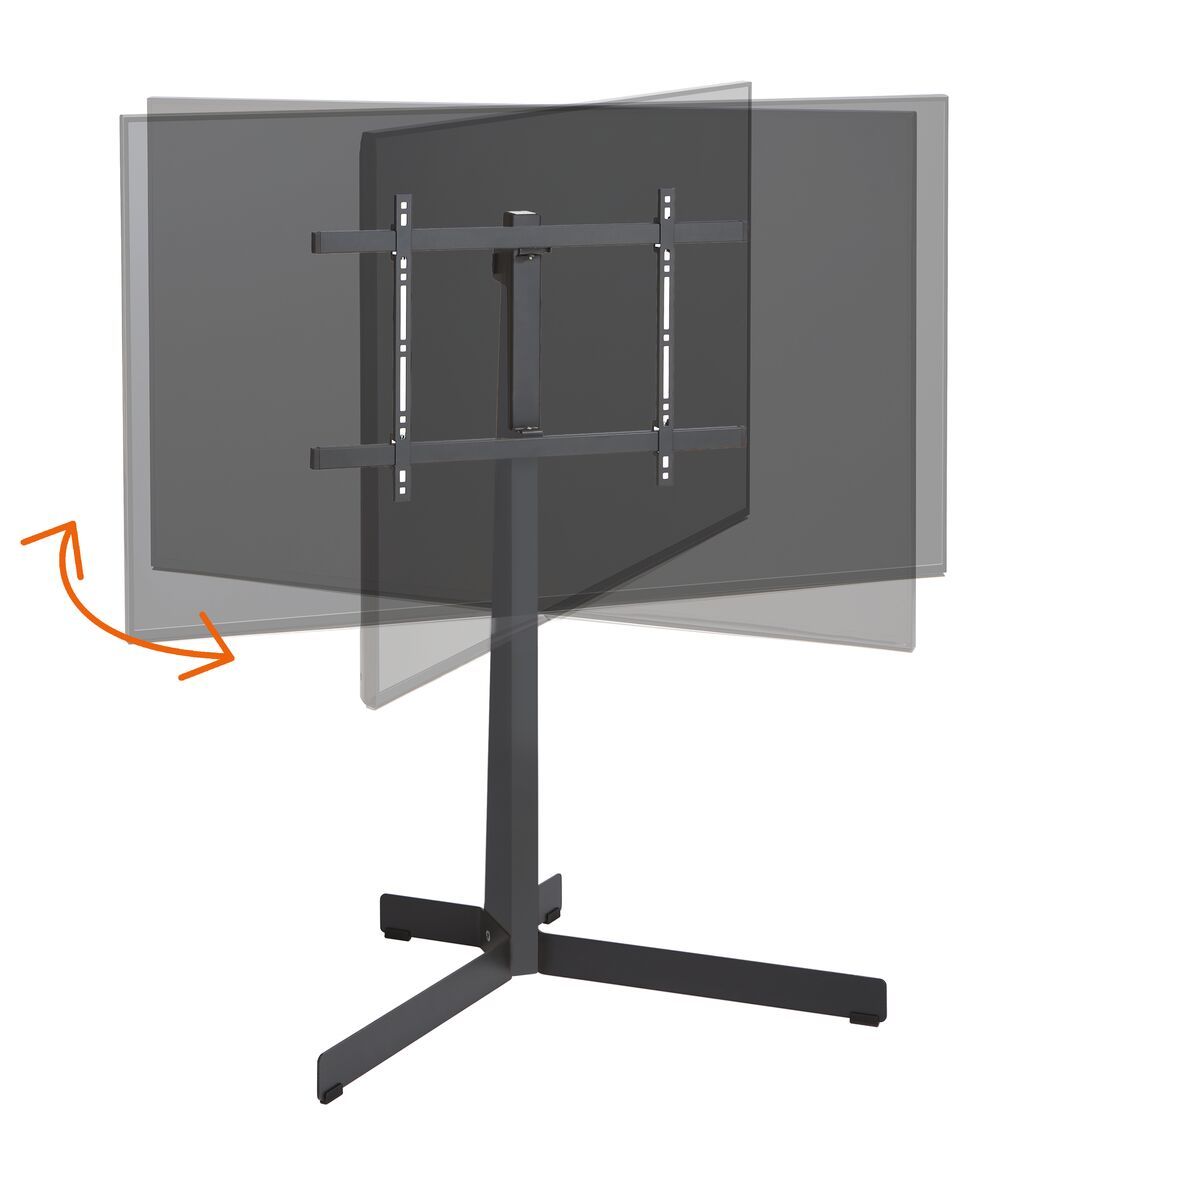 Vogel's TVS 3690 TV Floor Stand (black) - Suitable for 40 up to 77 inch TVs up to Application